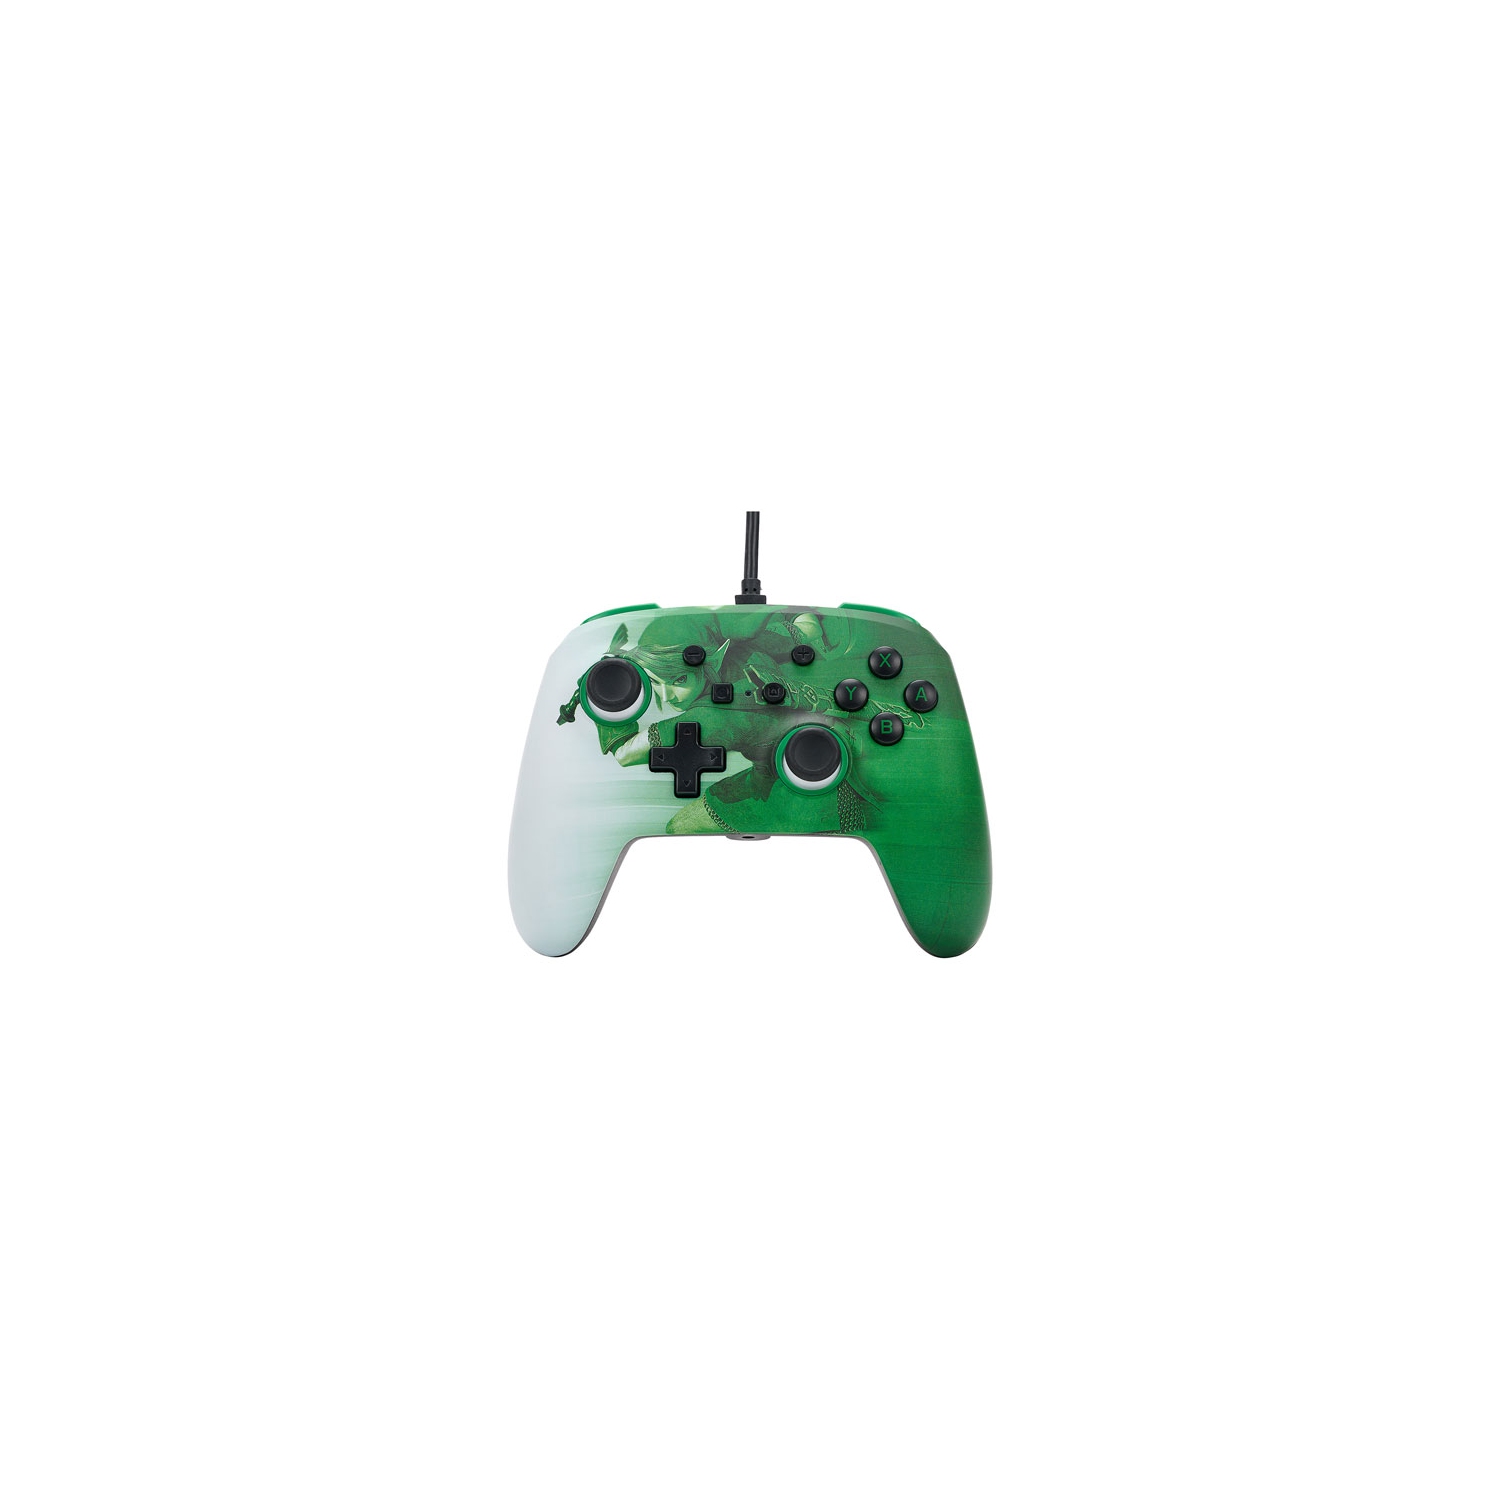 Refurbished (Good) PowerA Zelda Heroic Link Enhanced Wired Controller for Switch - Green